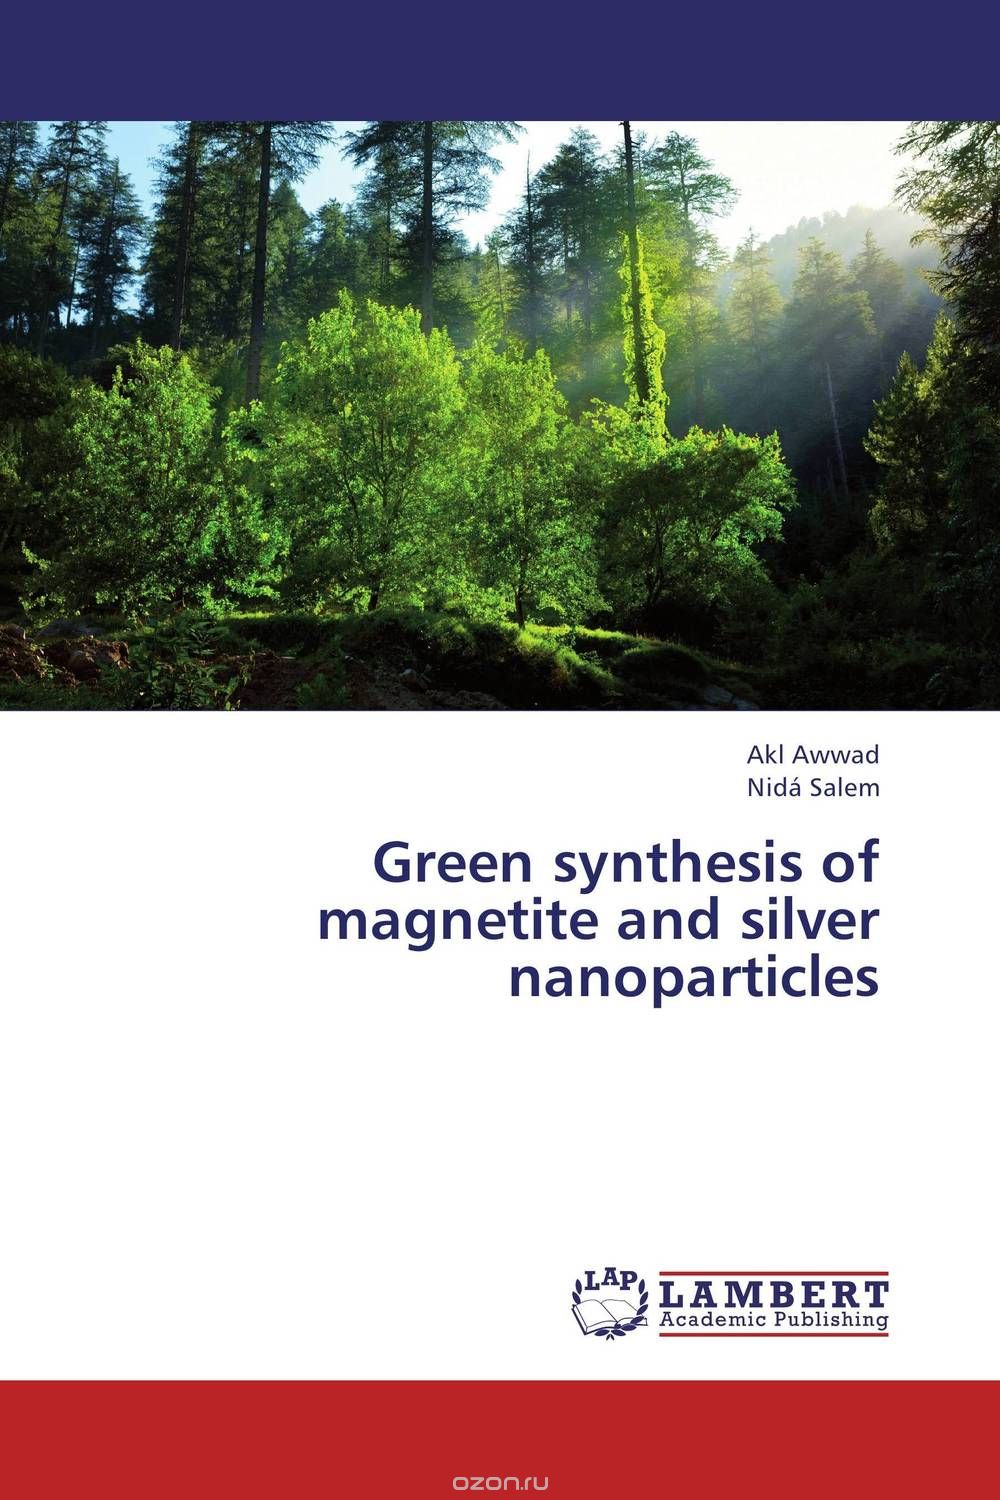 Скачать книгу "Green synthesis of magnetite and silver nanoparticles"